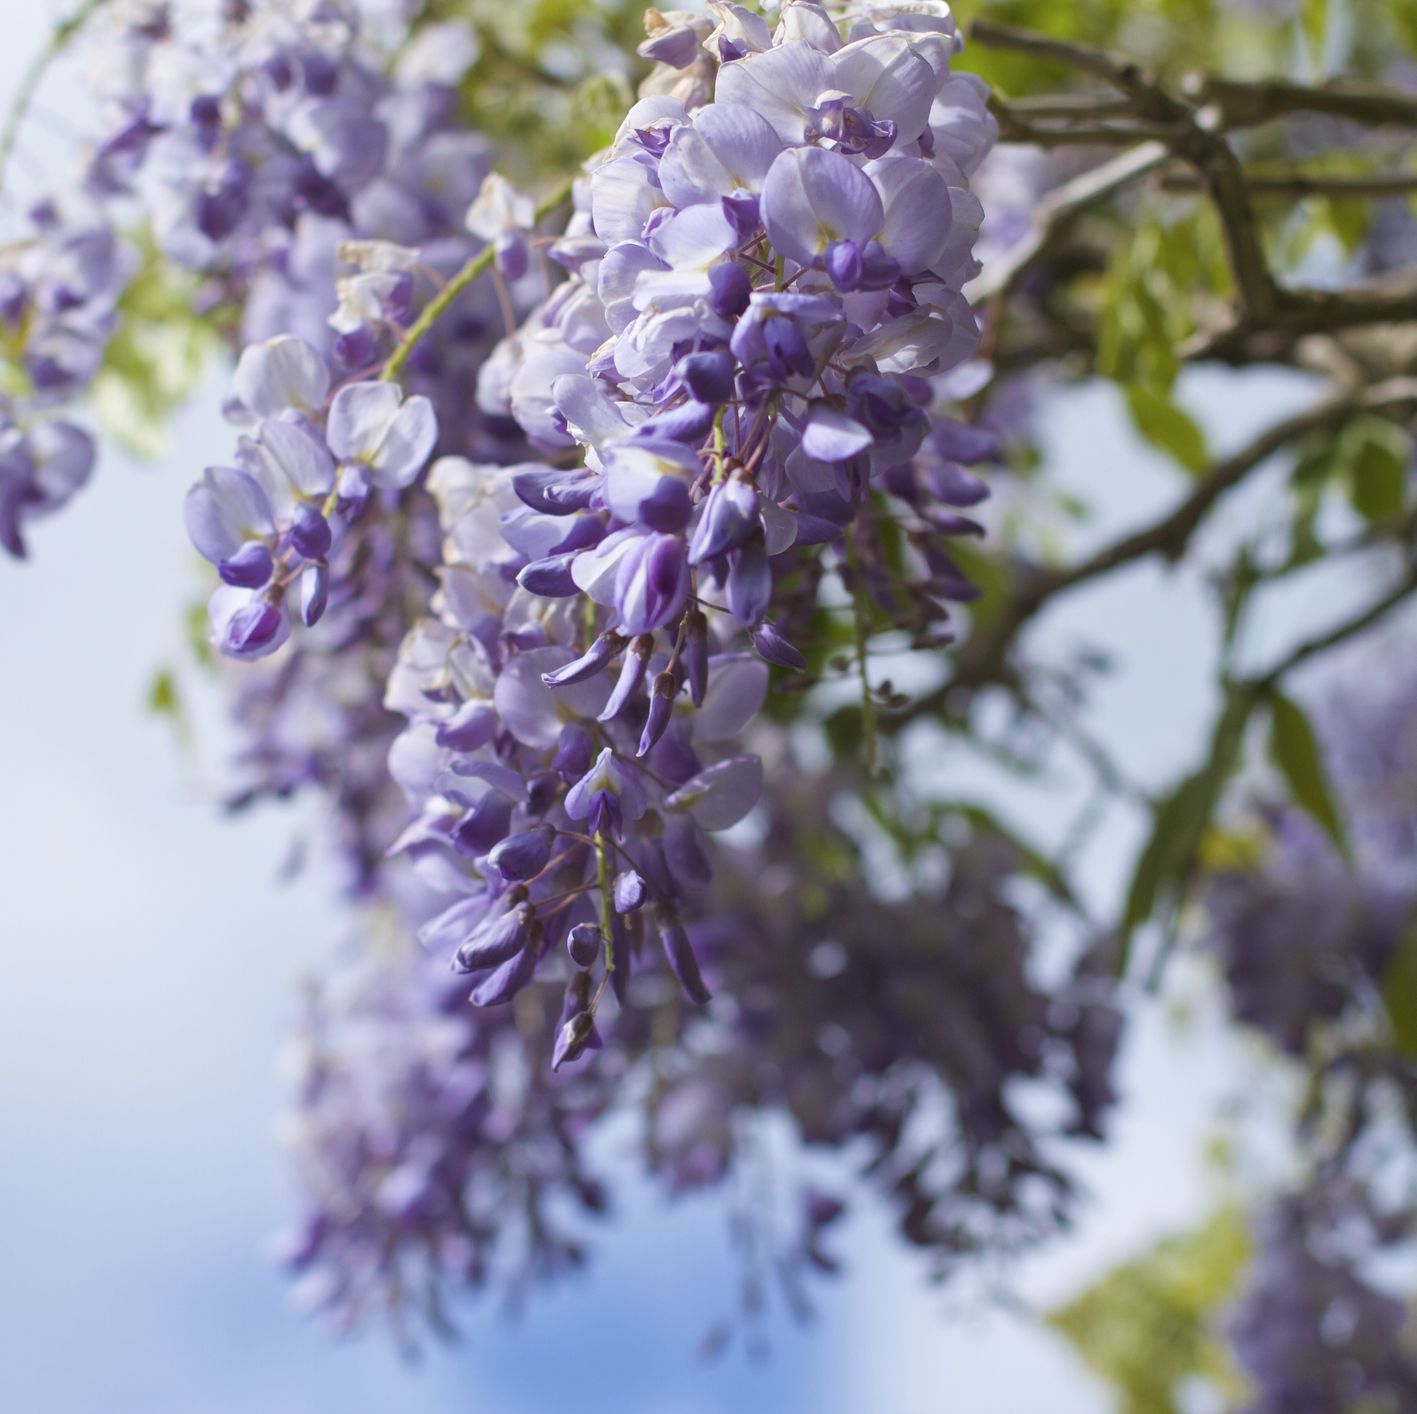 are wisteria plants poisonous to dogs and cats